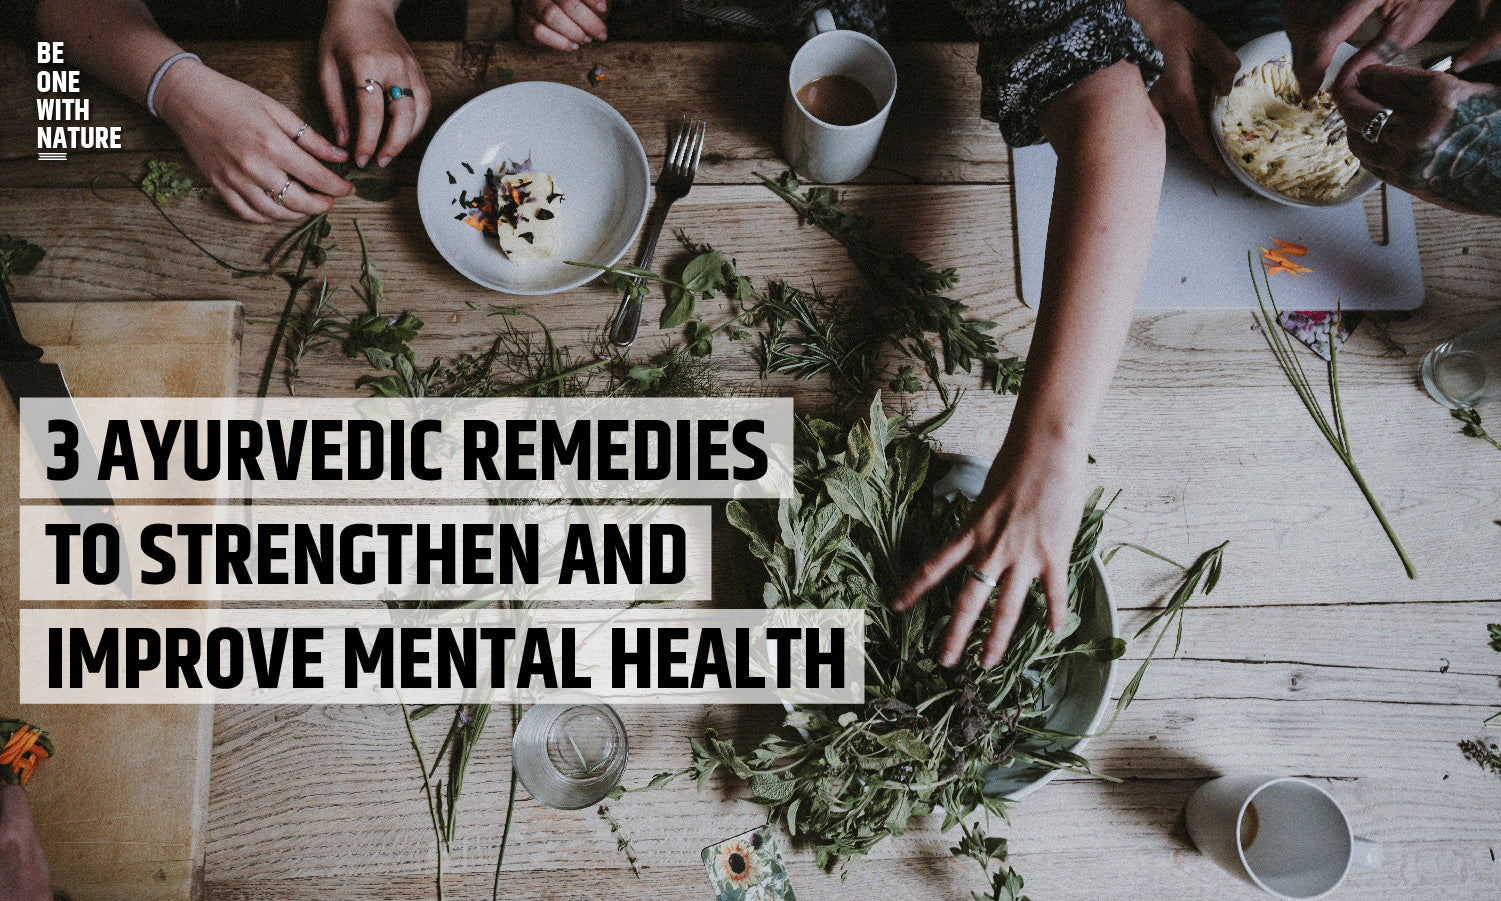 3 Ayurvedic remedies to strengthen and improve mental health